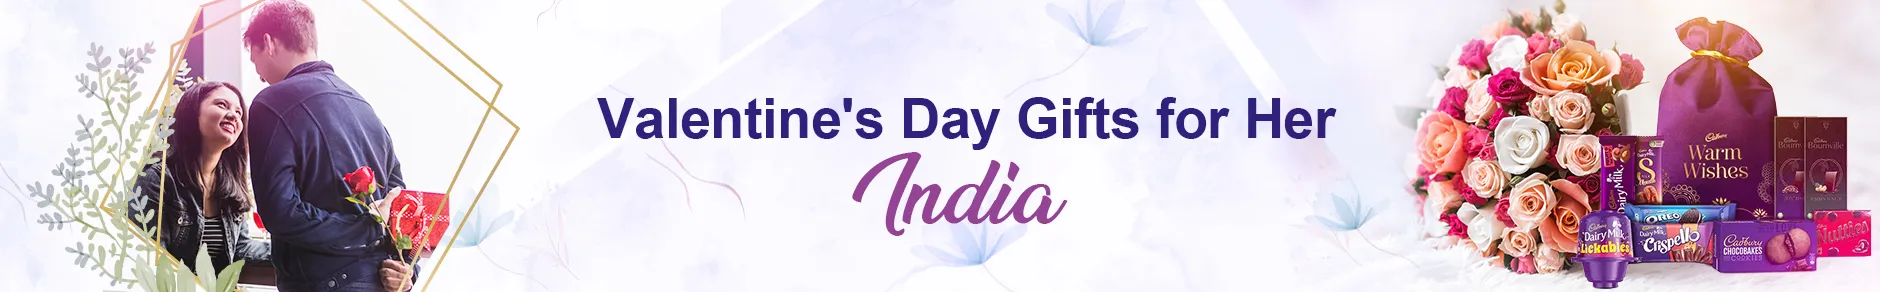 Gifts for Women in Garia | Send Flowers, Cake & Gift Hampers in 2 Hours | Same Day Delivery, Free Shipping